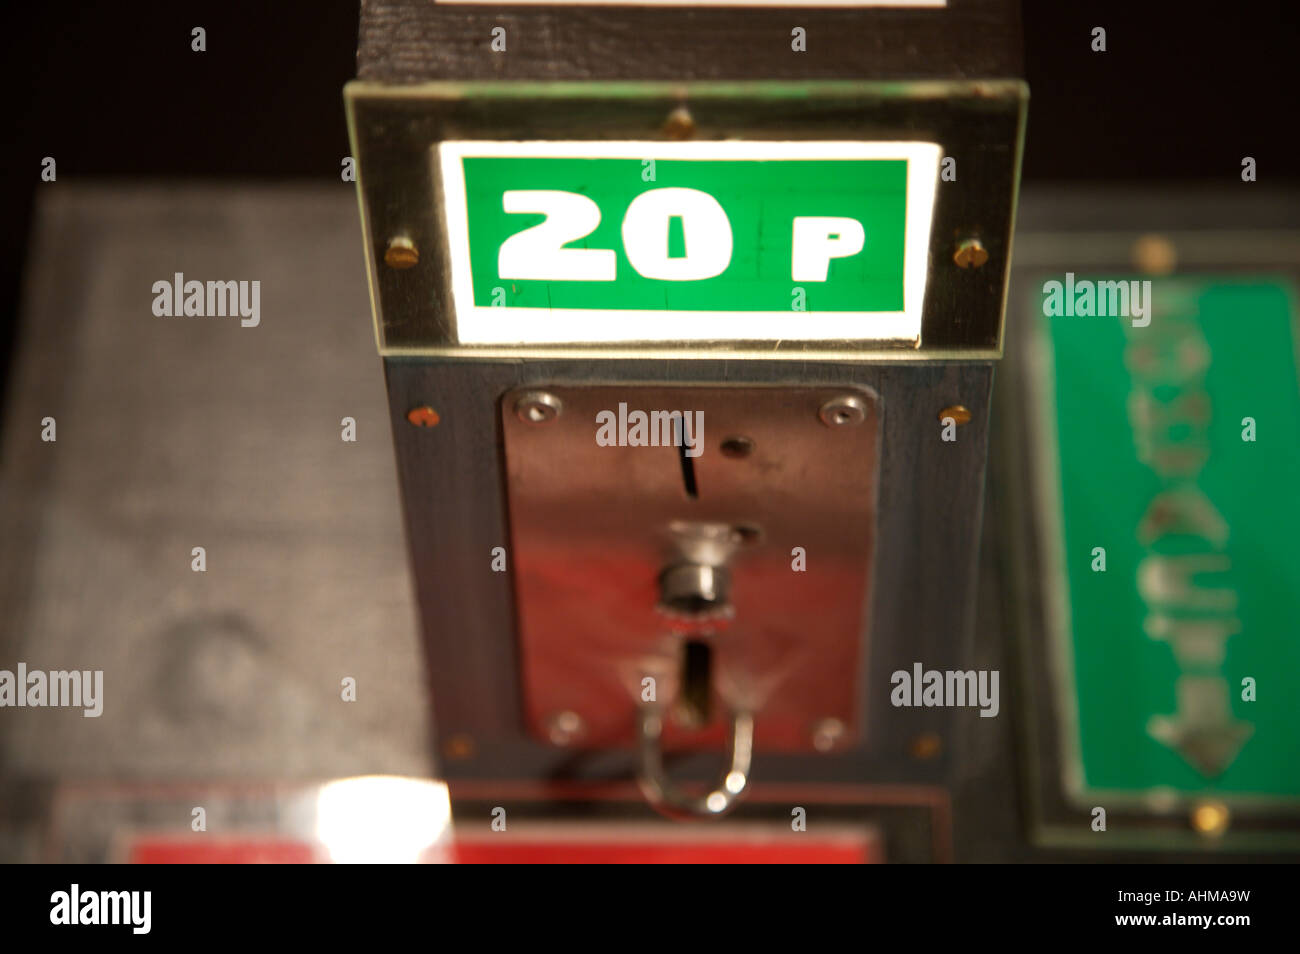 20p sign on coin operated arcade machine Stock Photo